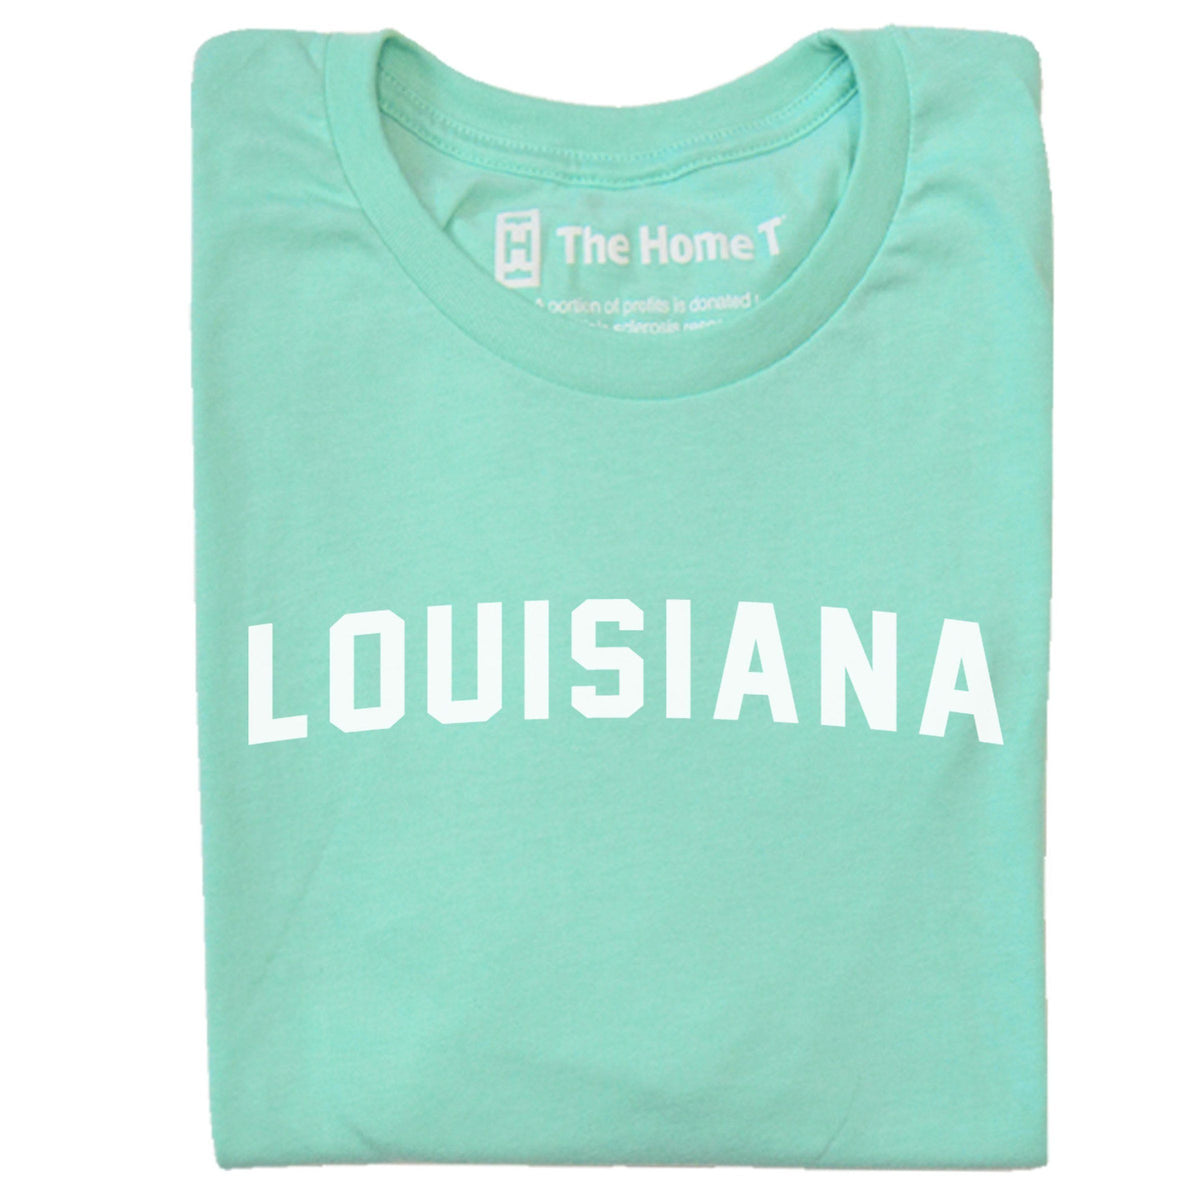 Louisiana Arched The Home T XS Mint